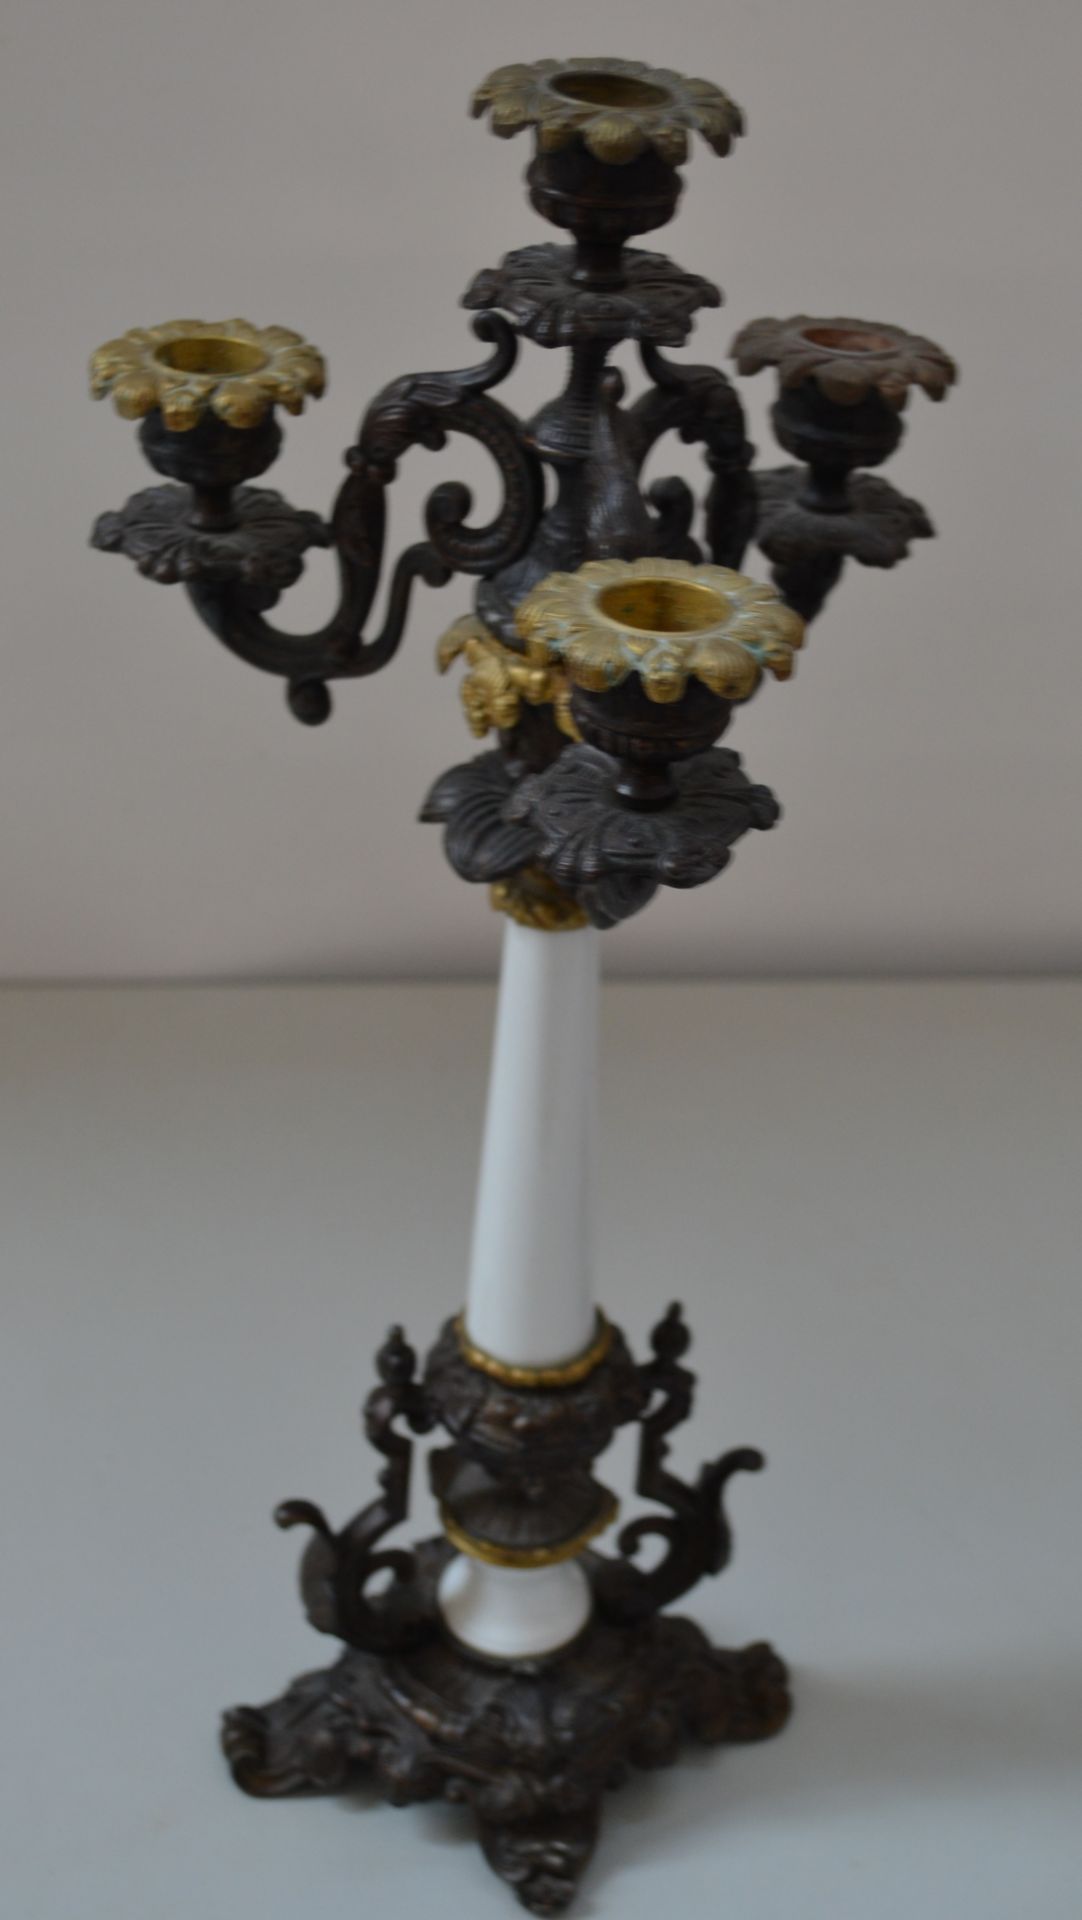 1 x A Pair Antique Candlesticks Holders - H45/W15cm - Ref J2175 - CL314 - Image 2 of 3